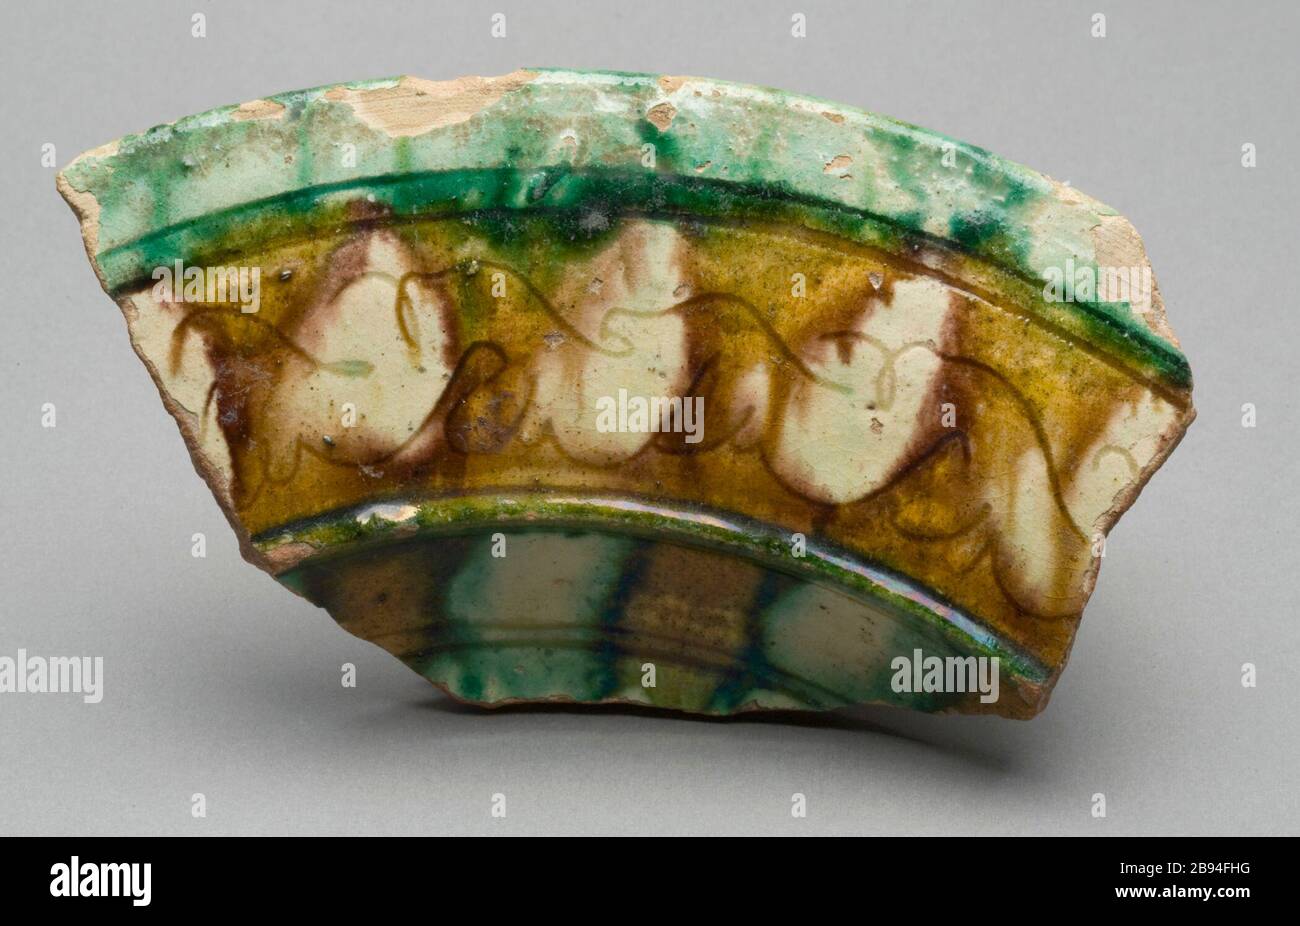 'Shard:  Section of Everted Rim; English:  Egypt, Faiyum, 10th century Fragments; shards Earthenware, sgraffito splash ware Gift of William Lillys in Memory of Dr. Edward L.B. Terrace (M.83.251.11) Islamic Art; 10th century date QS:P571,+950-00-00T00:00:00Z/7; ' Stock Photo